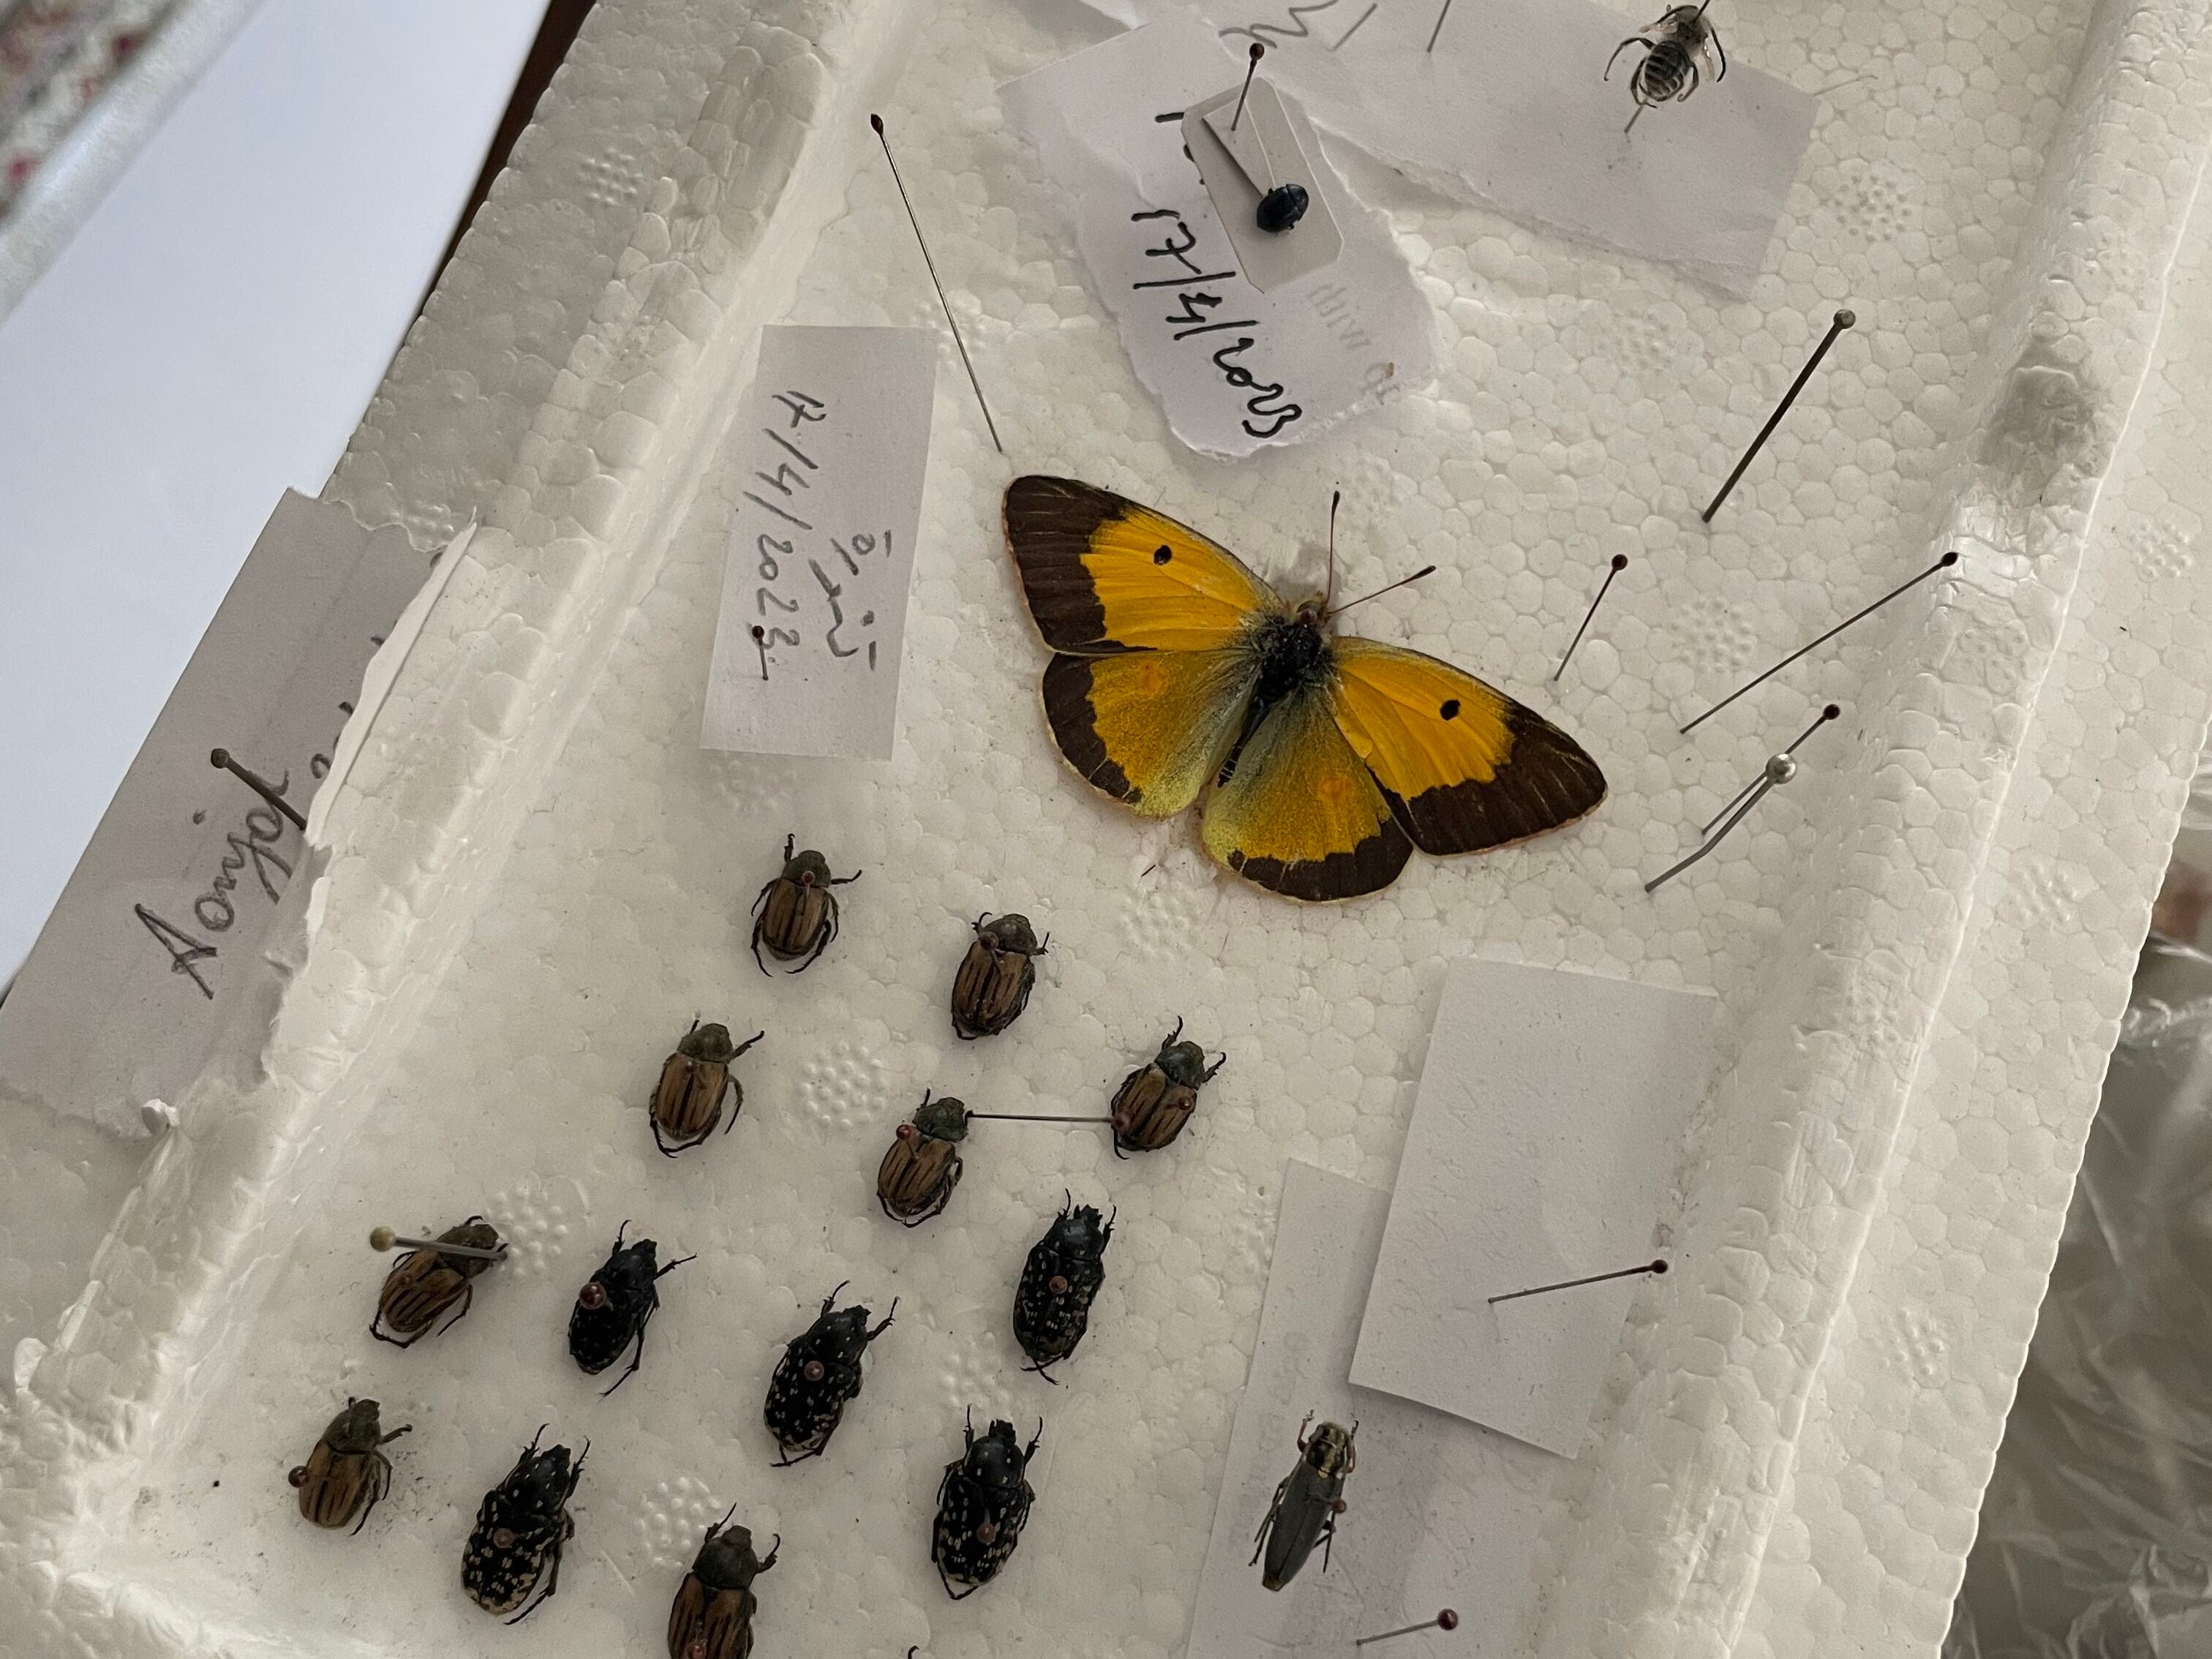 Azar’s collection includes insects as well, including these beetles and butterflies.